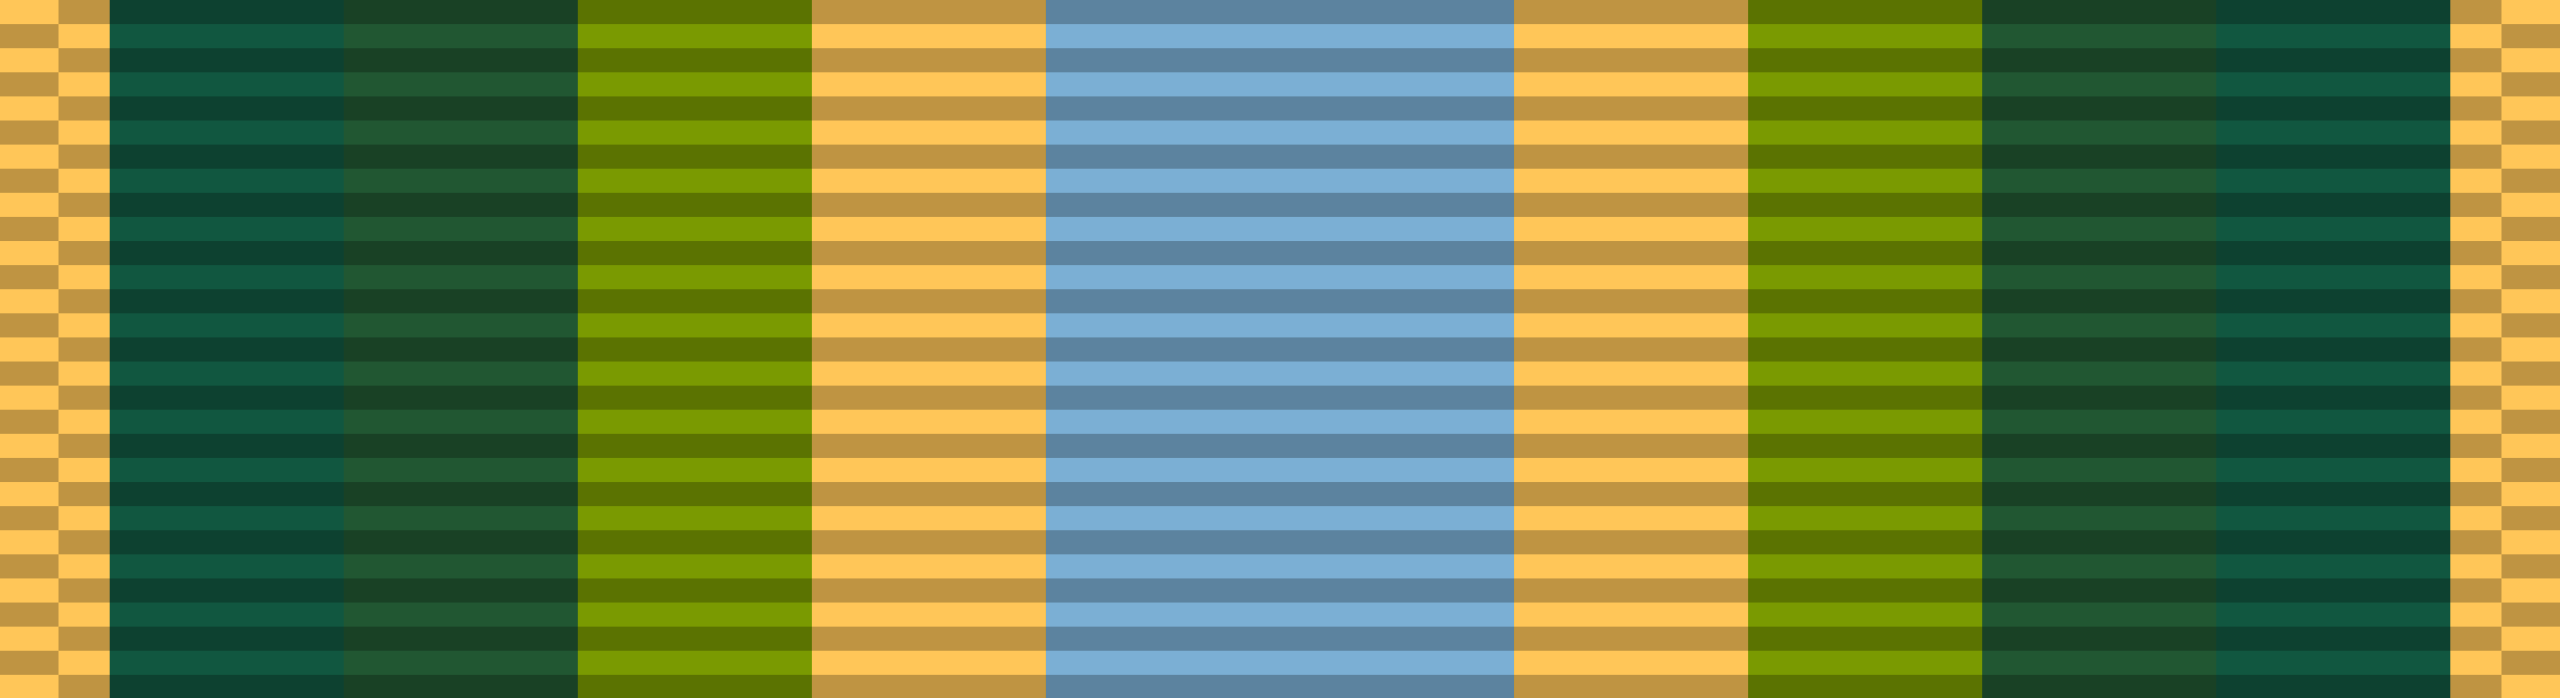 File:Navy and Marine Corps Medal ribbon.svg - Wikipedia